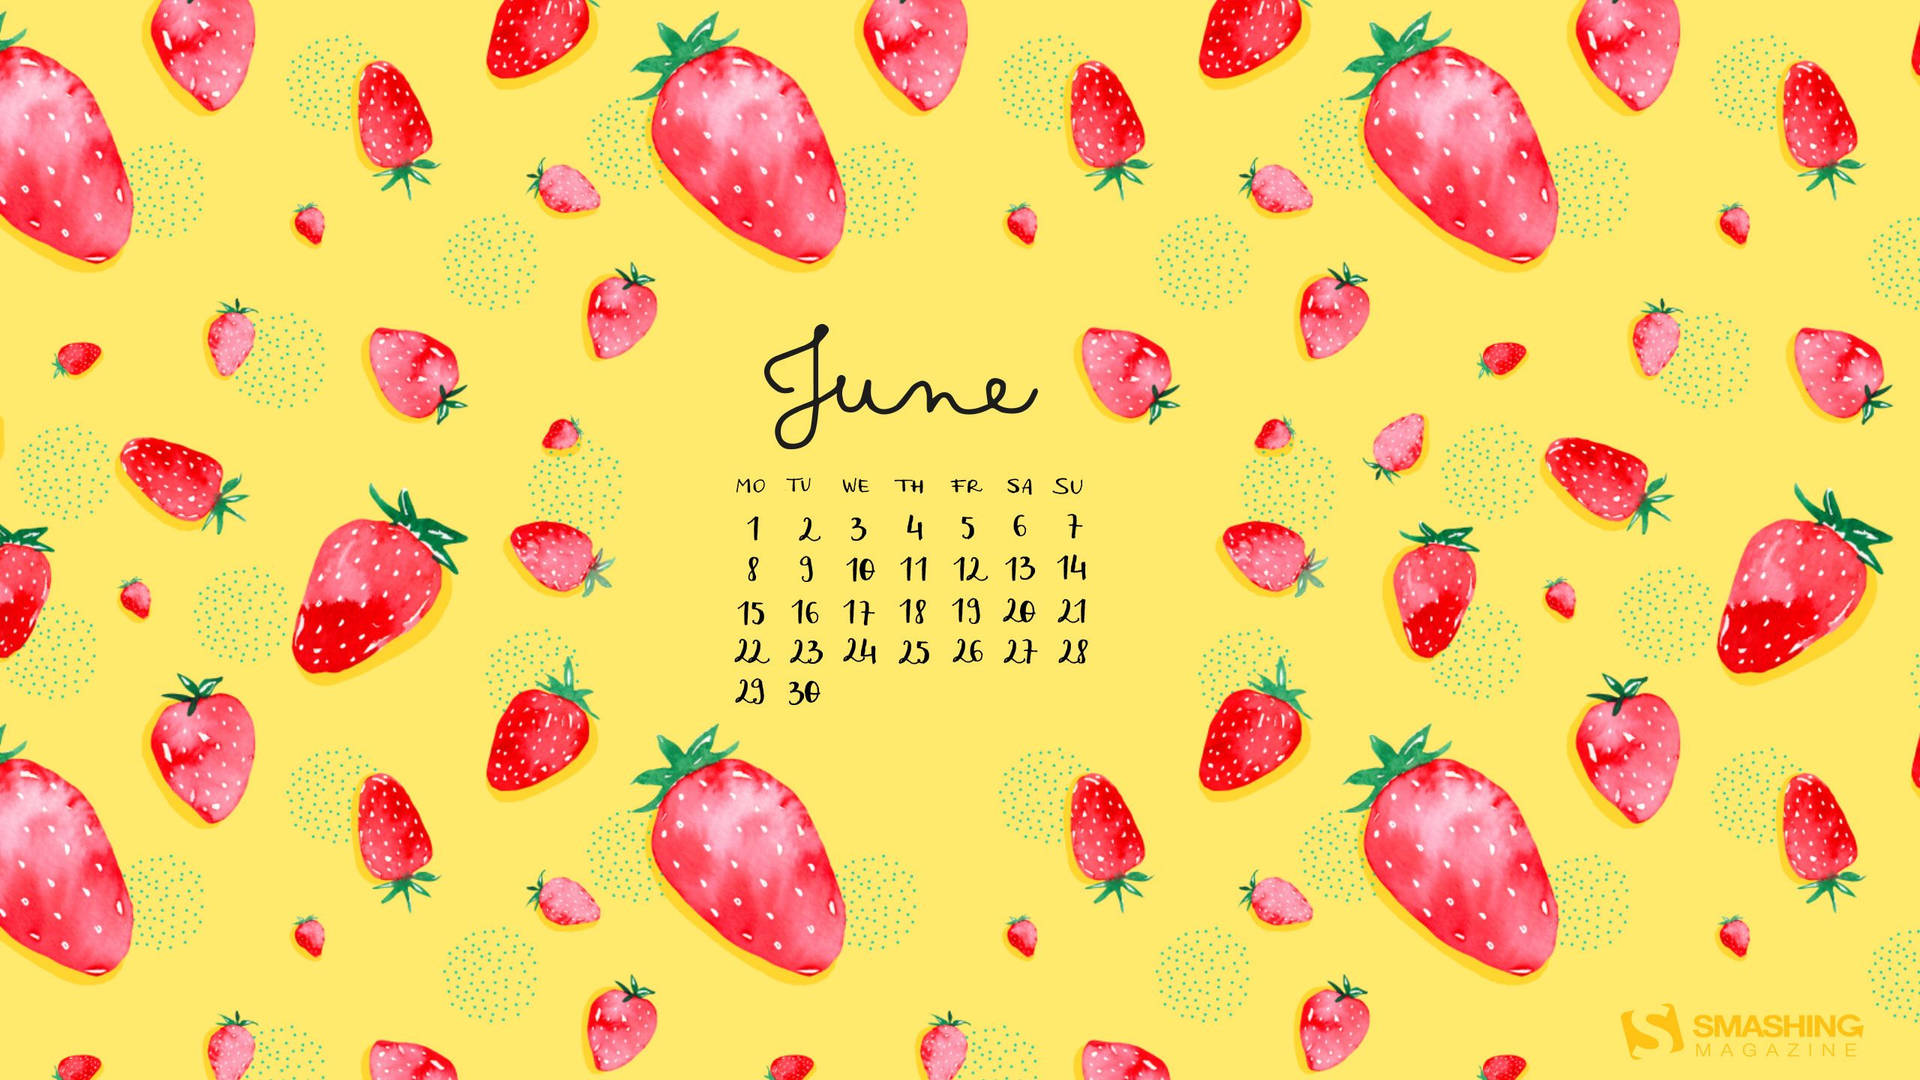 Celebrate the Month of June with Tasty Strawberries. Wallpaper